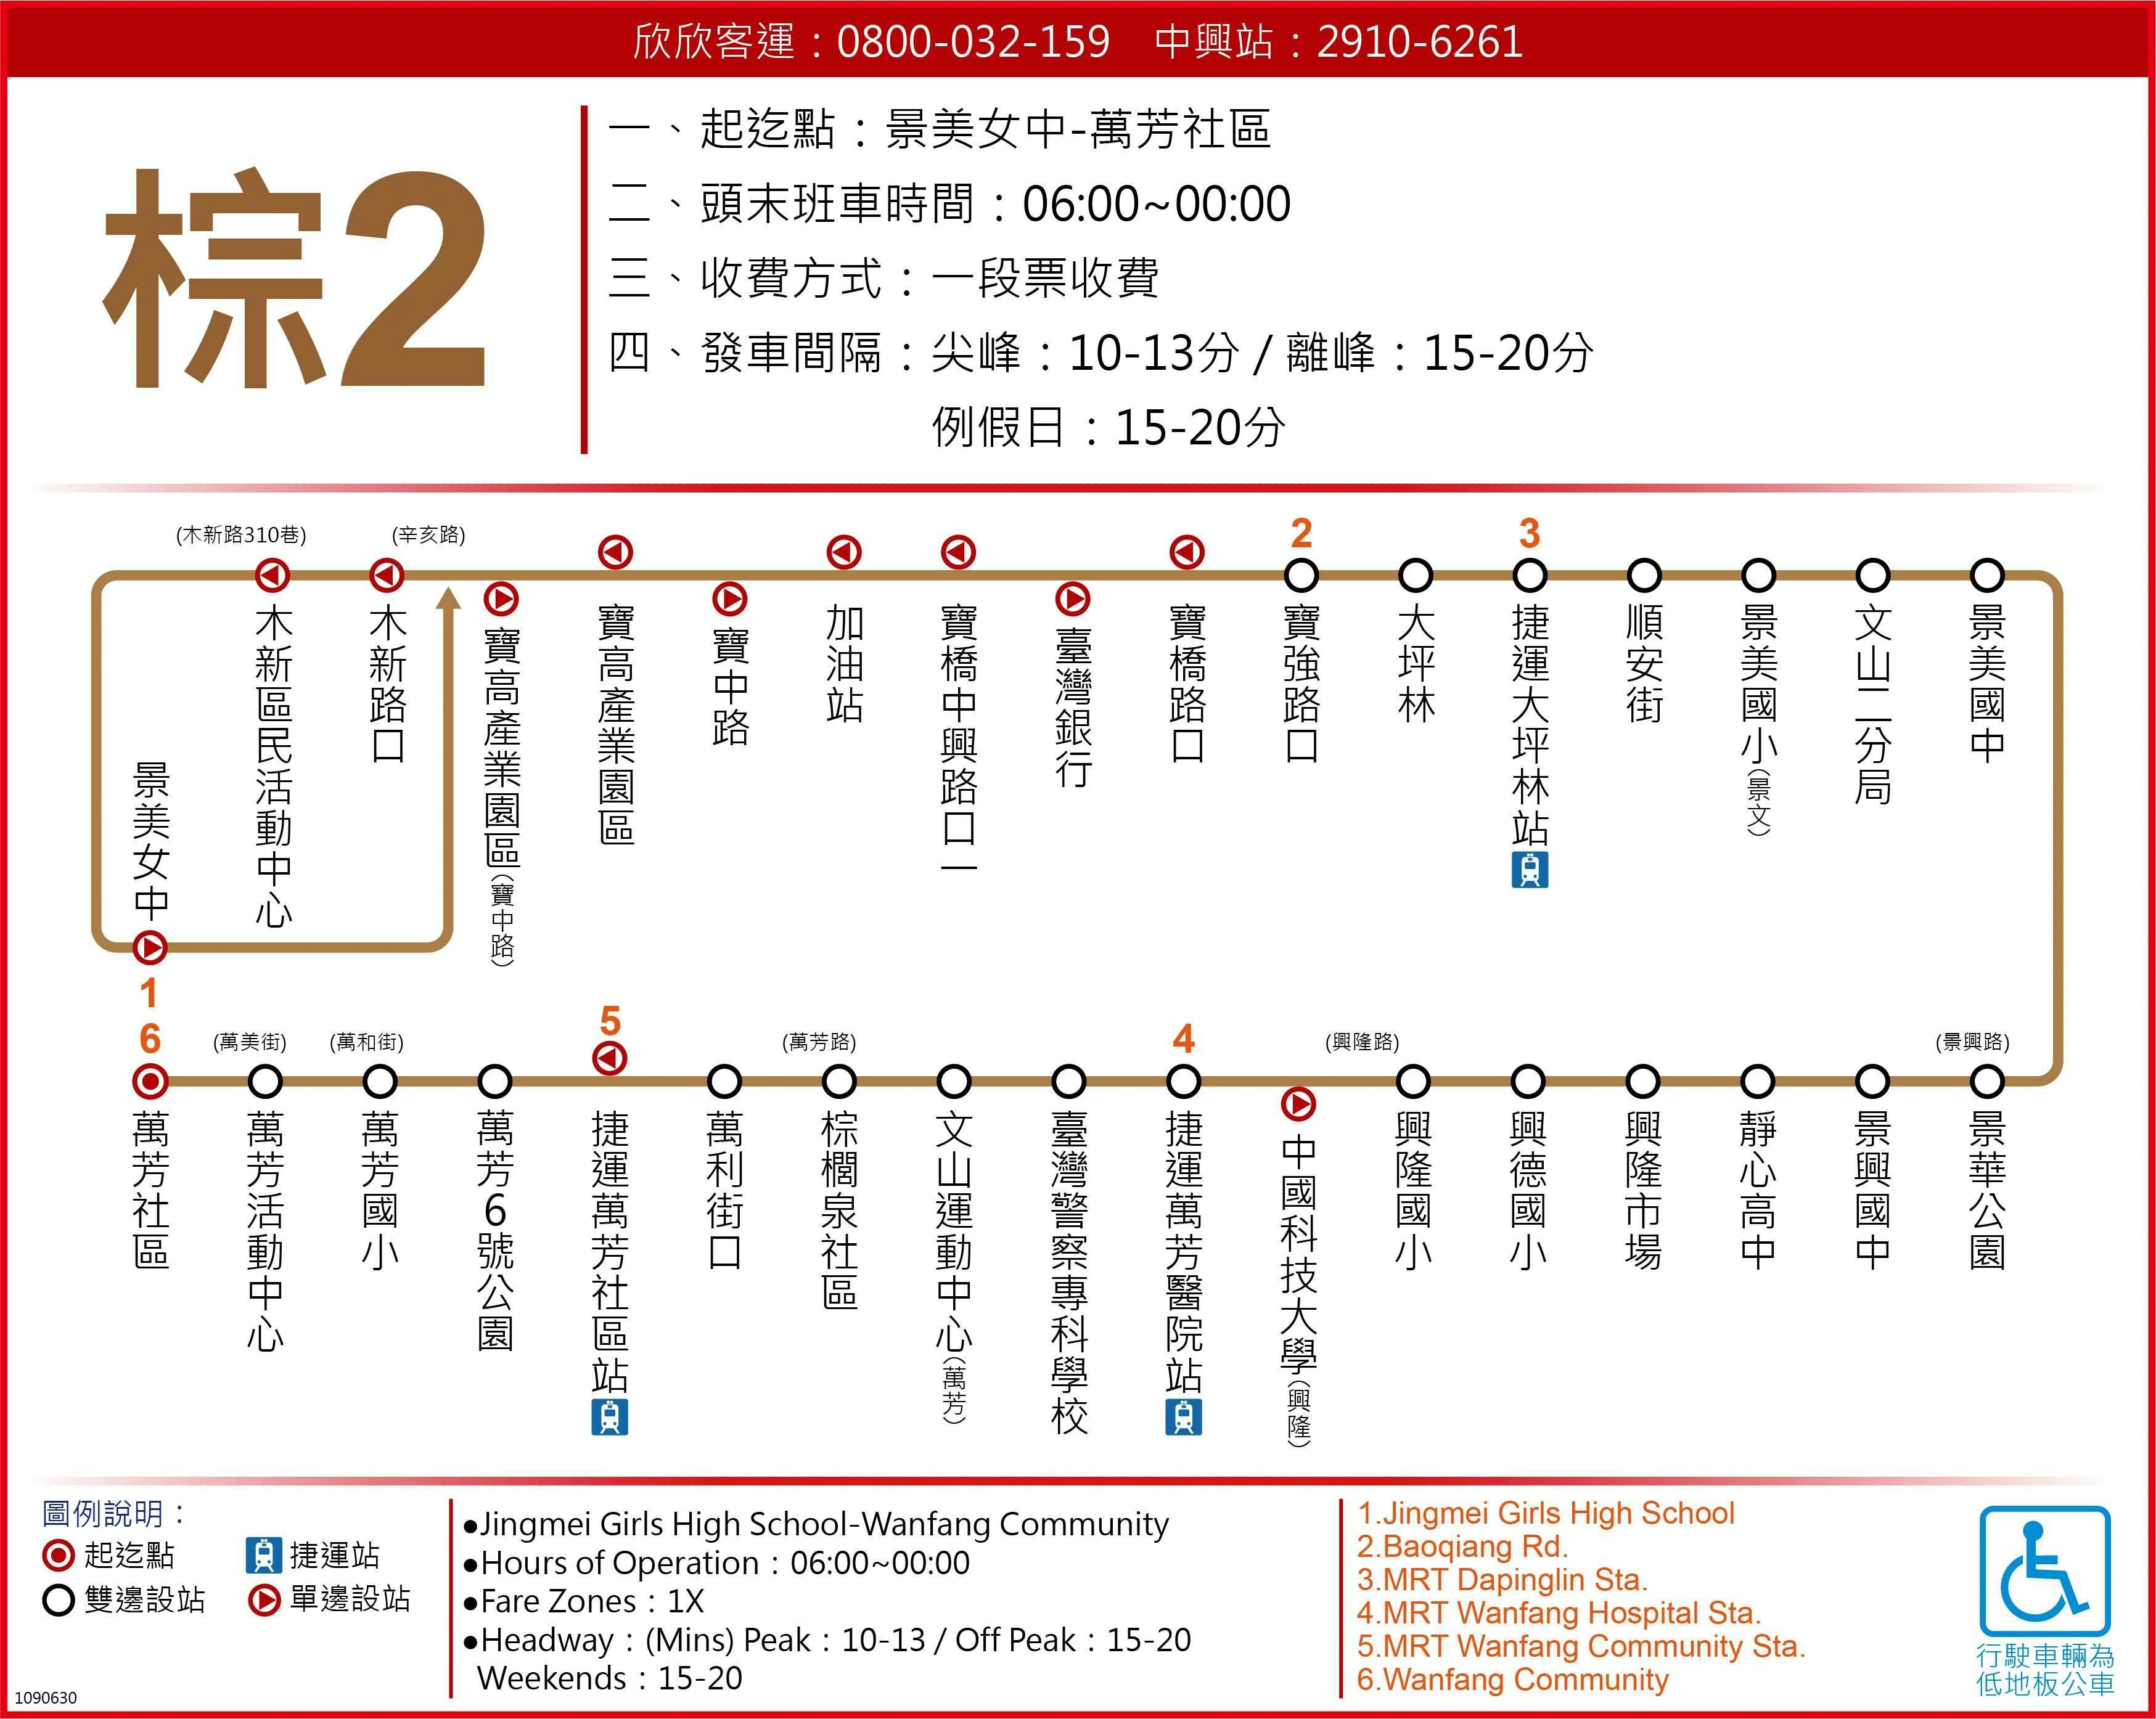 BR2Route Map-台北市 Bus